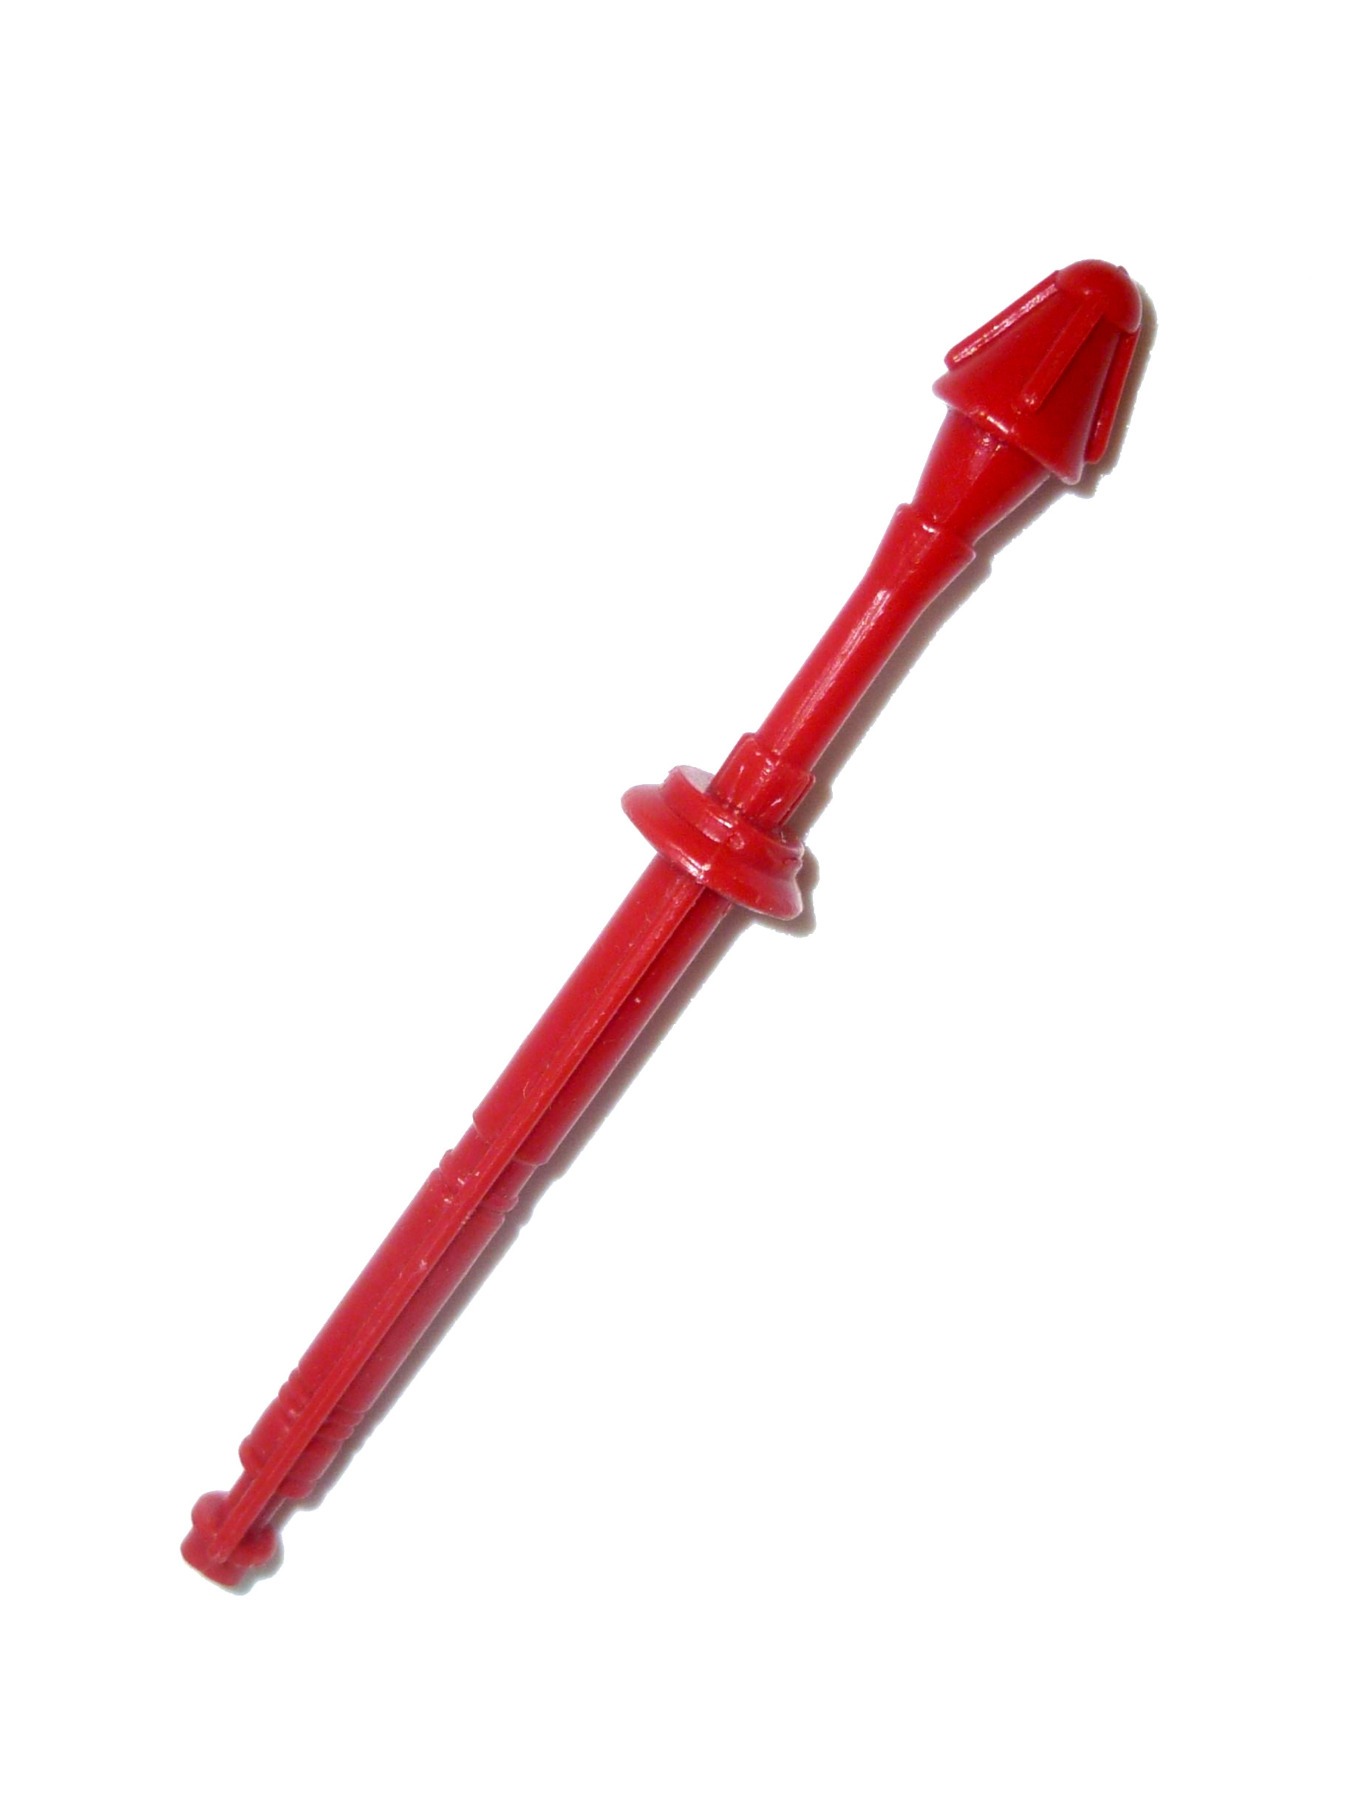 Spare part red rocket / Missile fun tech / new-ray